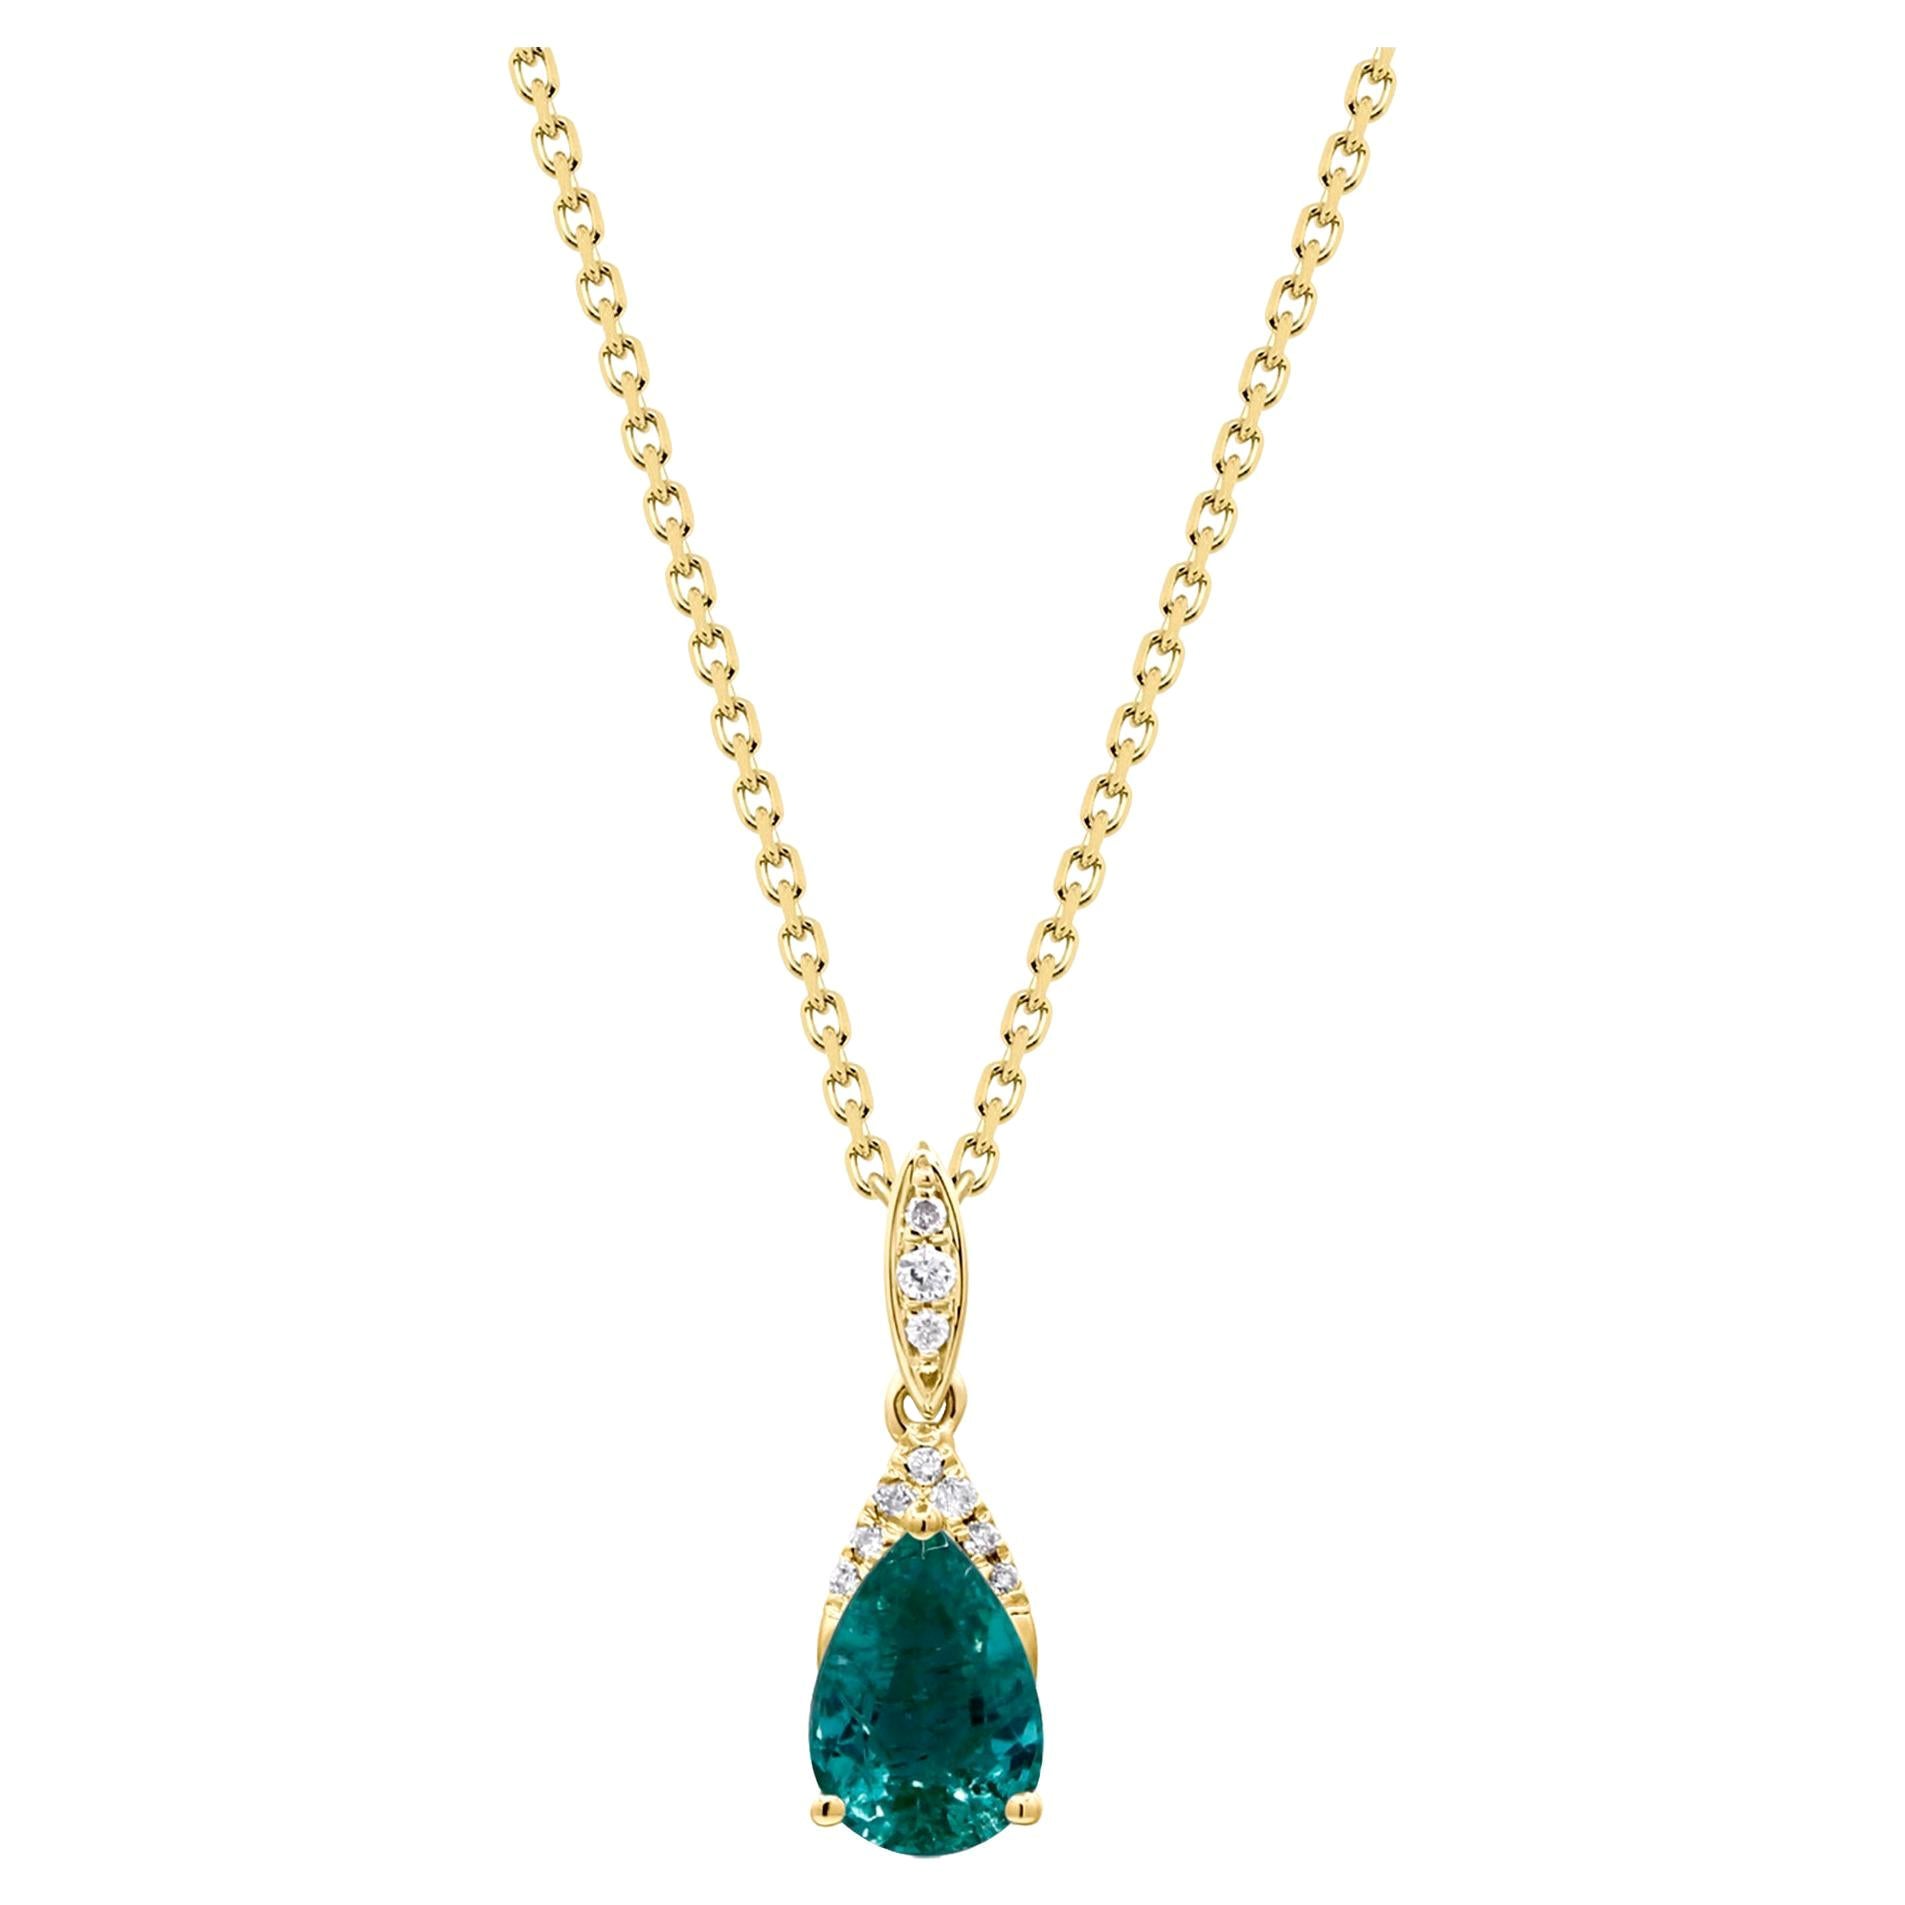 0.64 Carat Pear-Cut Emerald with Diamond Accents 10K Yellow Gold Pendant For Sale